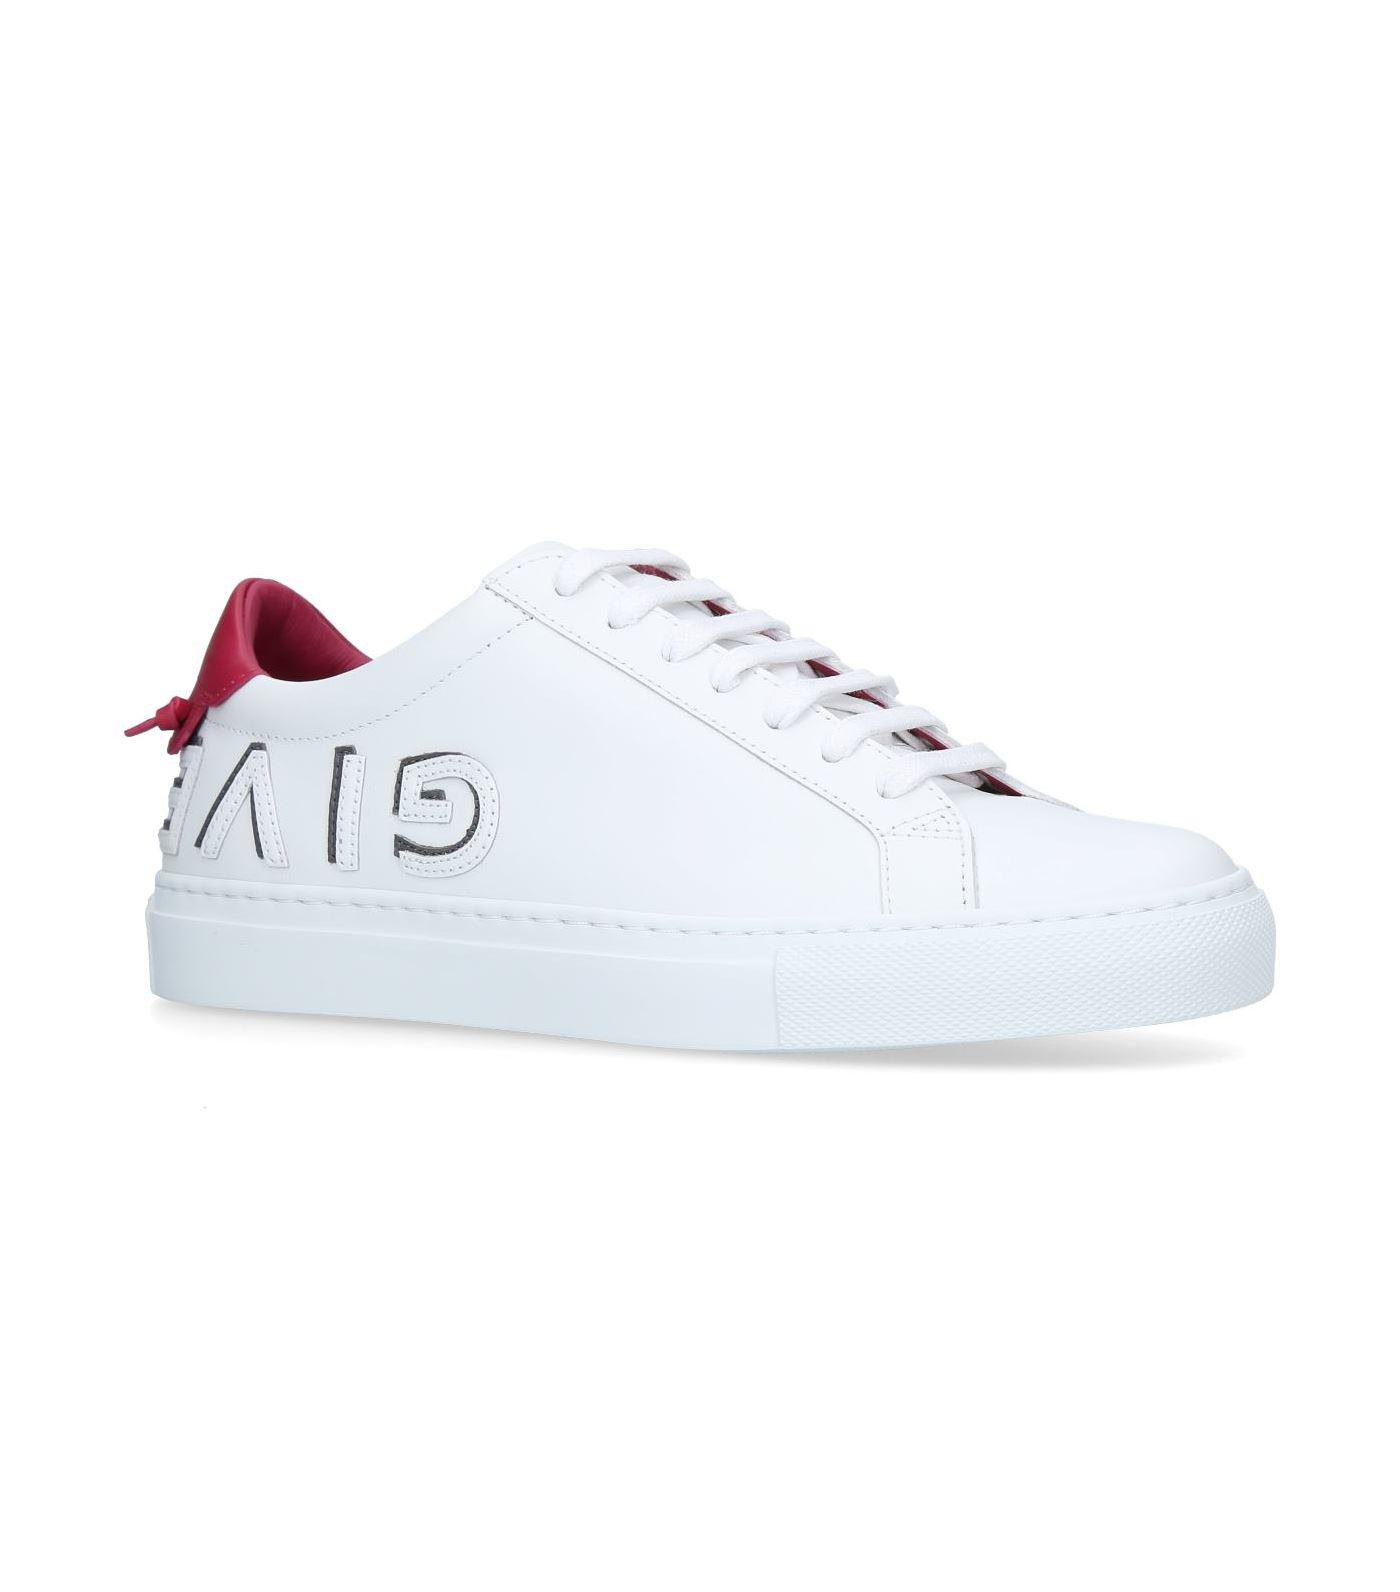 Givenchy Leather Knot Low Top Sneakers in White - Lyst